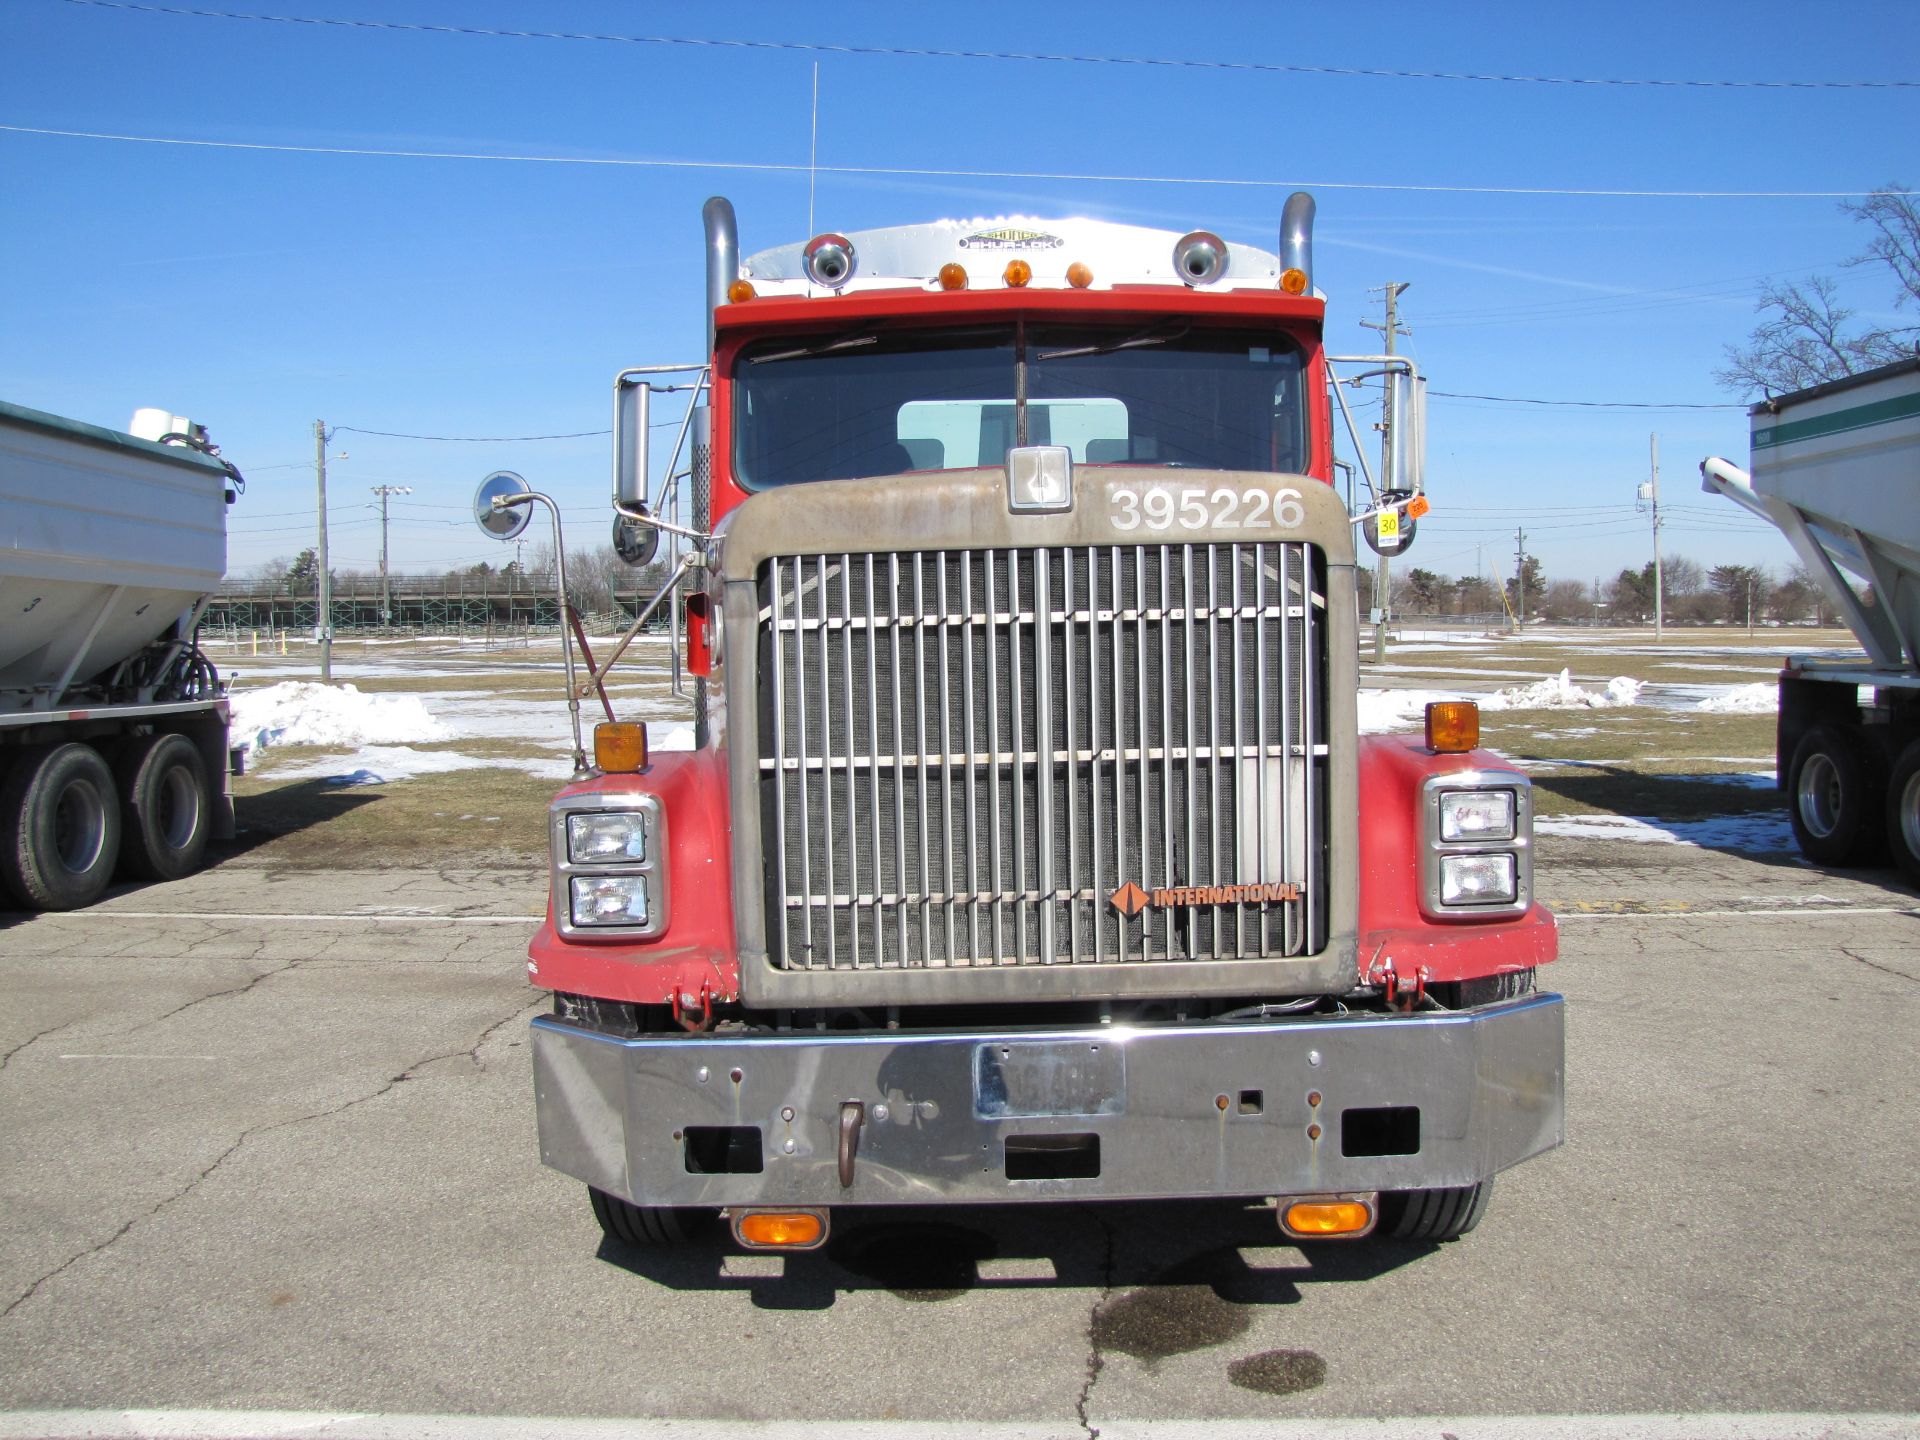 1988 International Eagle 9300, day cab, air ride, wet kit, Cat 3406P, Fuller 13-speed trans - Image 53 of 88